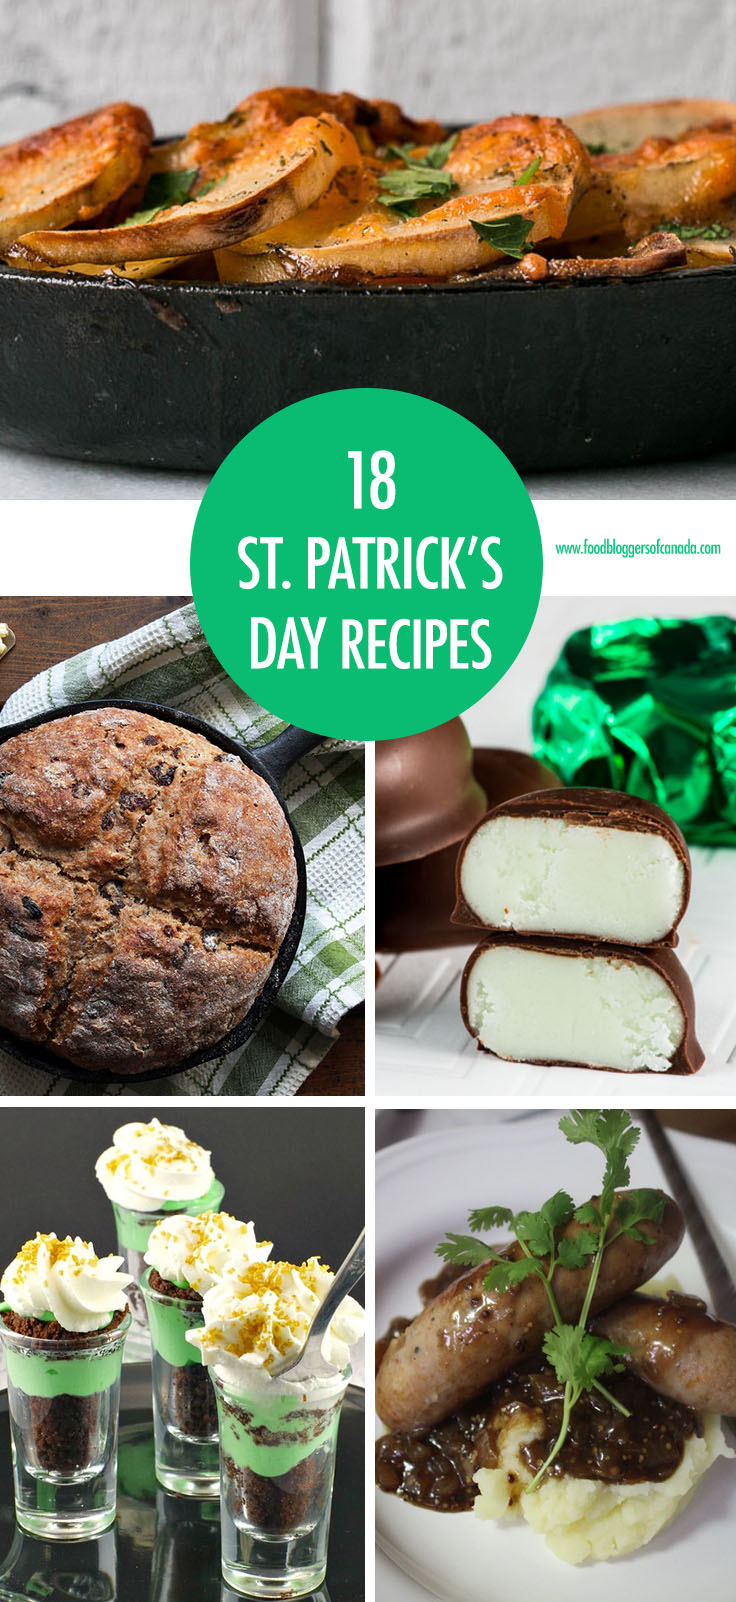 St Patrick's Day Recipes | Food Bloggers of Canada